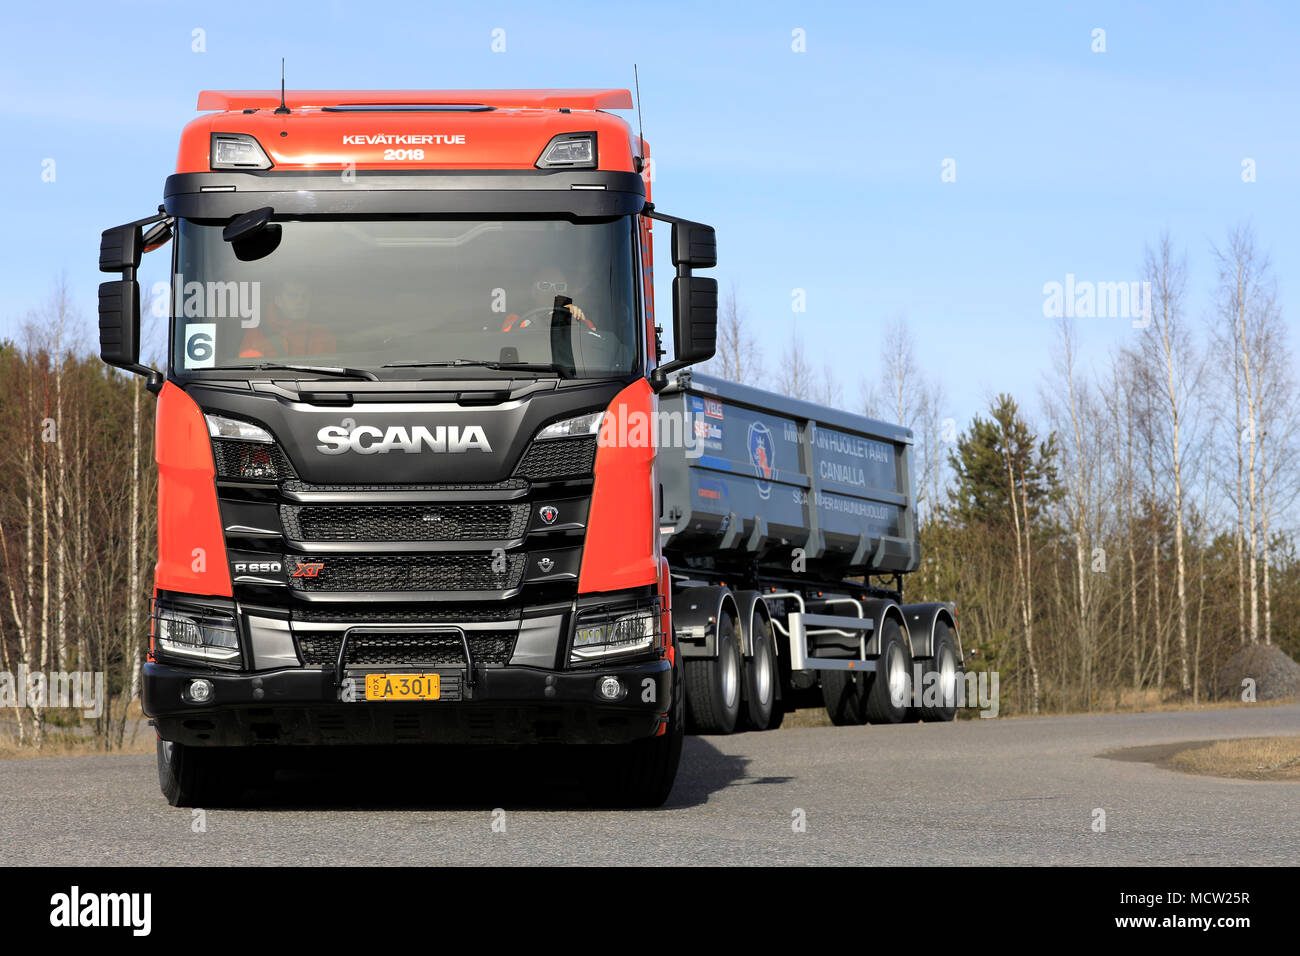 LIETO, FINLAND - APRIL 12, 2018: Front view of orange Scania R650 B10X4 XT gravel truck during road test on Scania Tour 2018 in Turku. Stock Photo